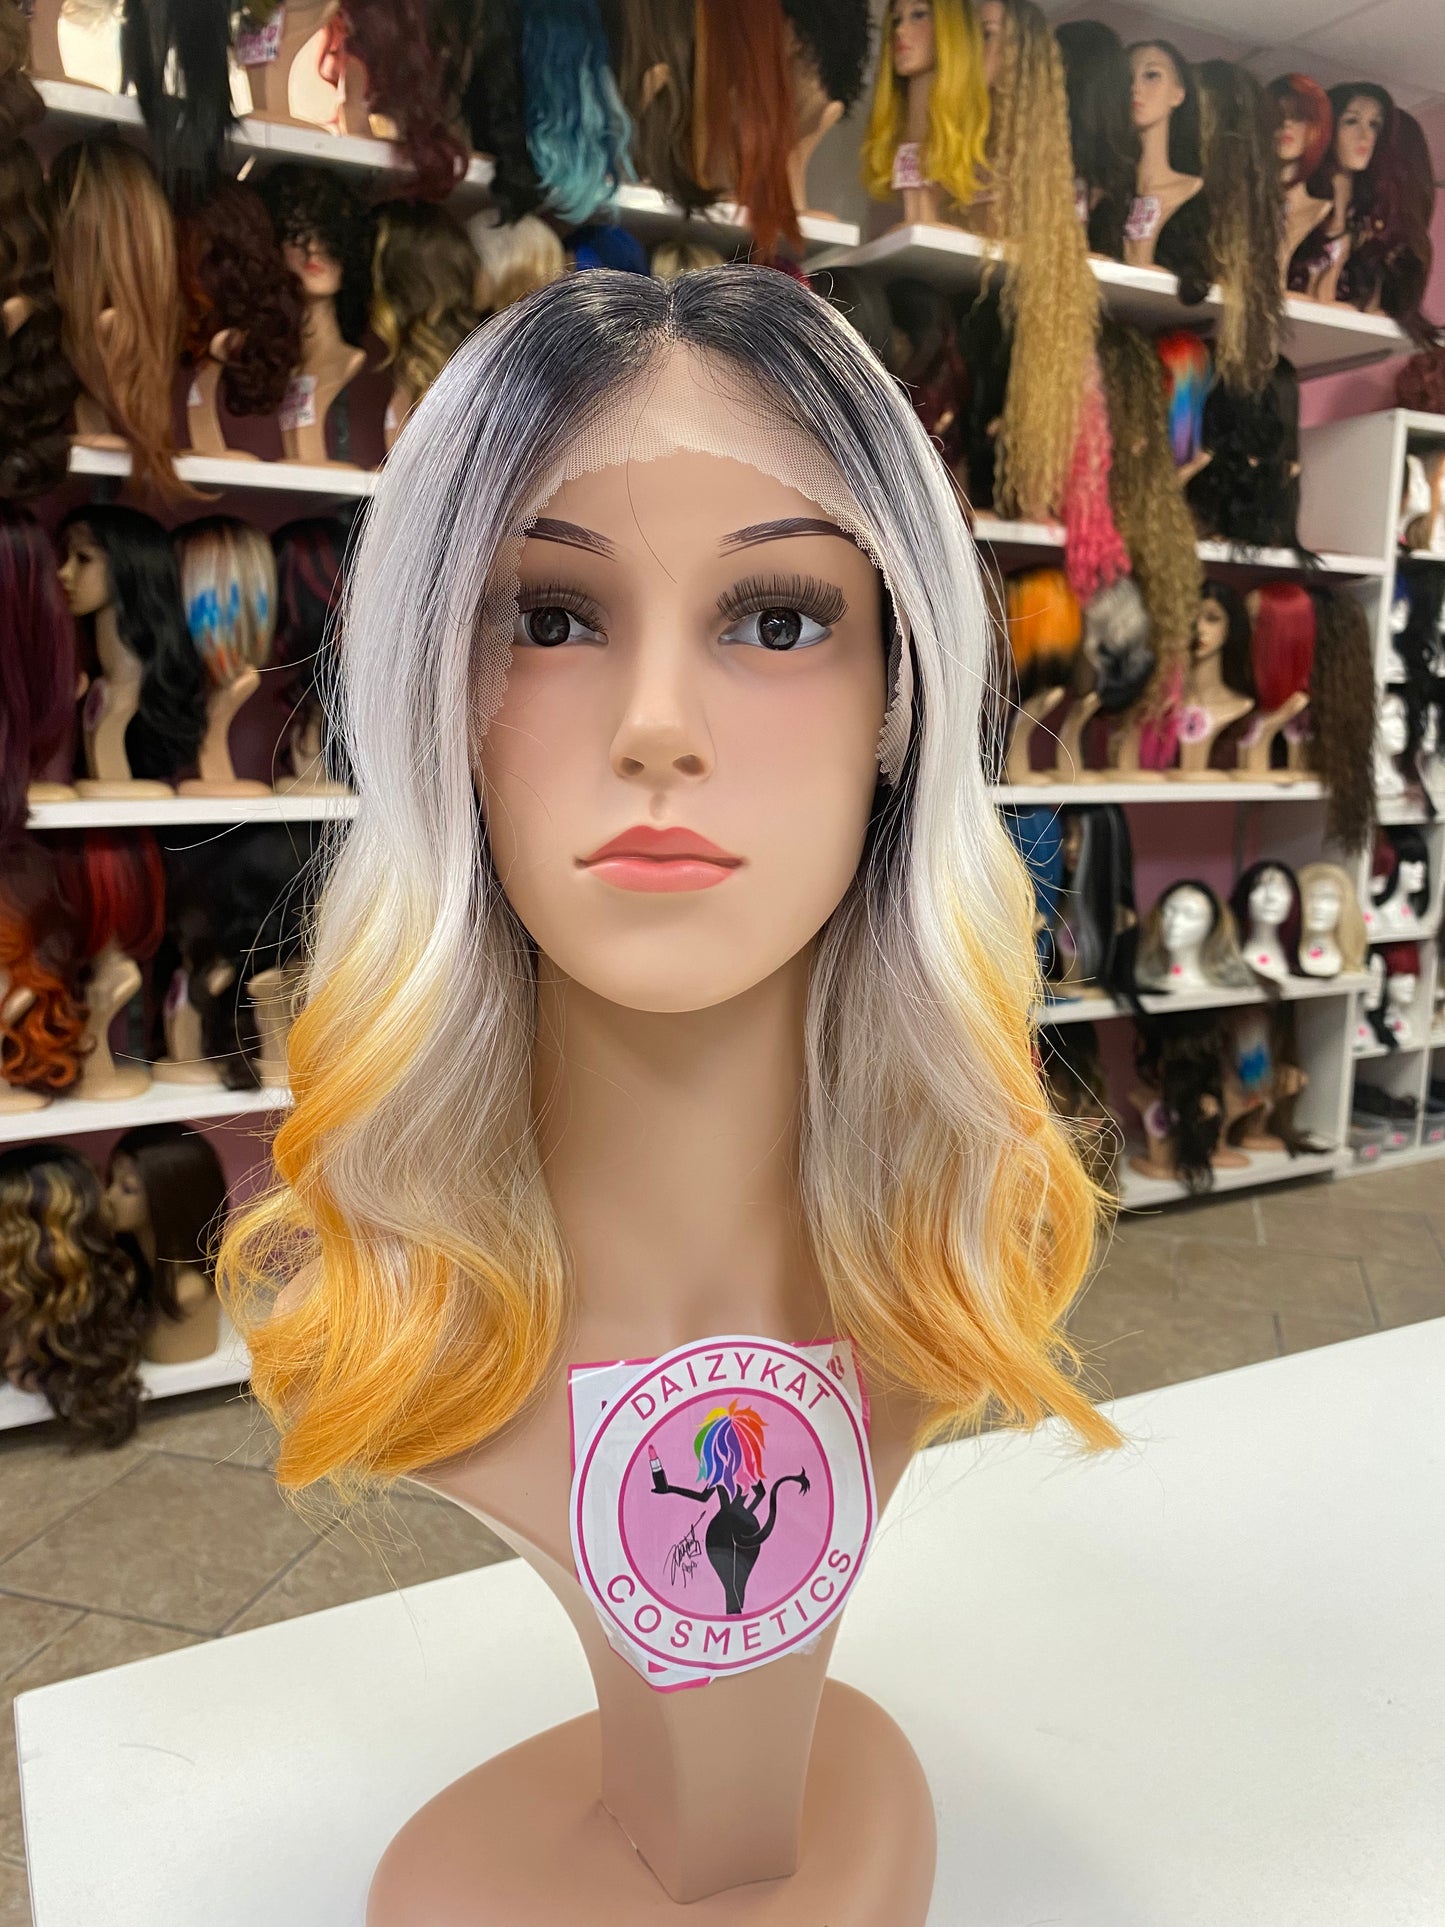 Holly - Middle Part Lace Front Wig BLACL/WHITE/YELLOW - DaizyKat Cosmetics Holly - Middle Part Lace Front Wig BLACL/WHITE/YELLOW DaizyKat Cosmetics Wigs